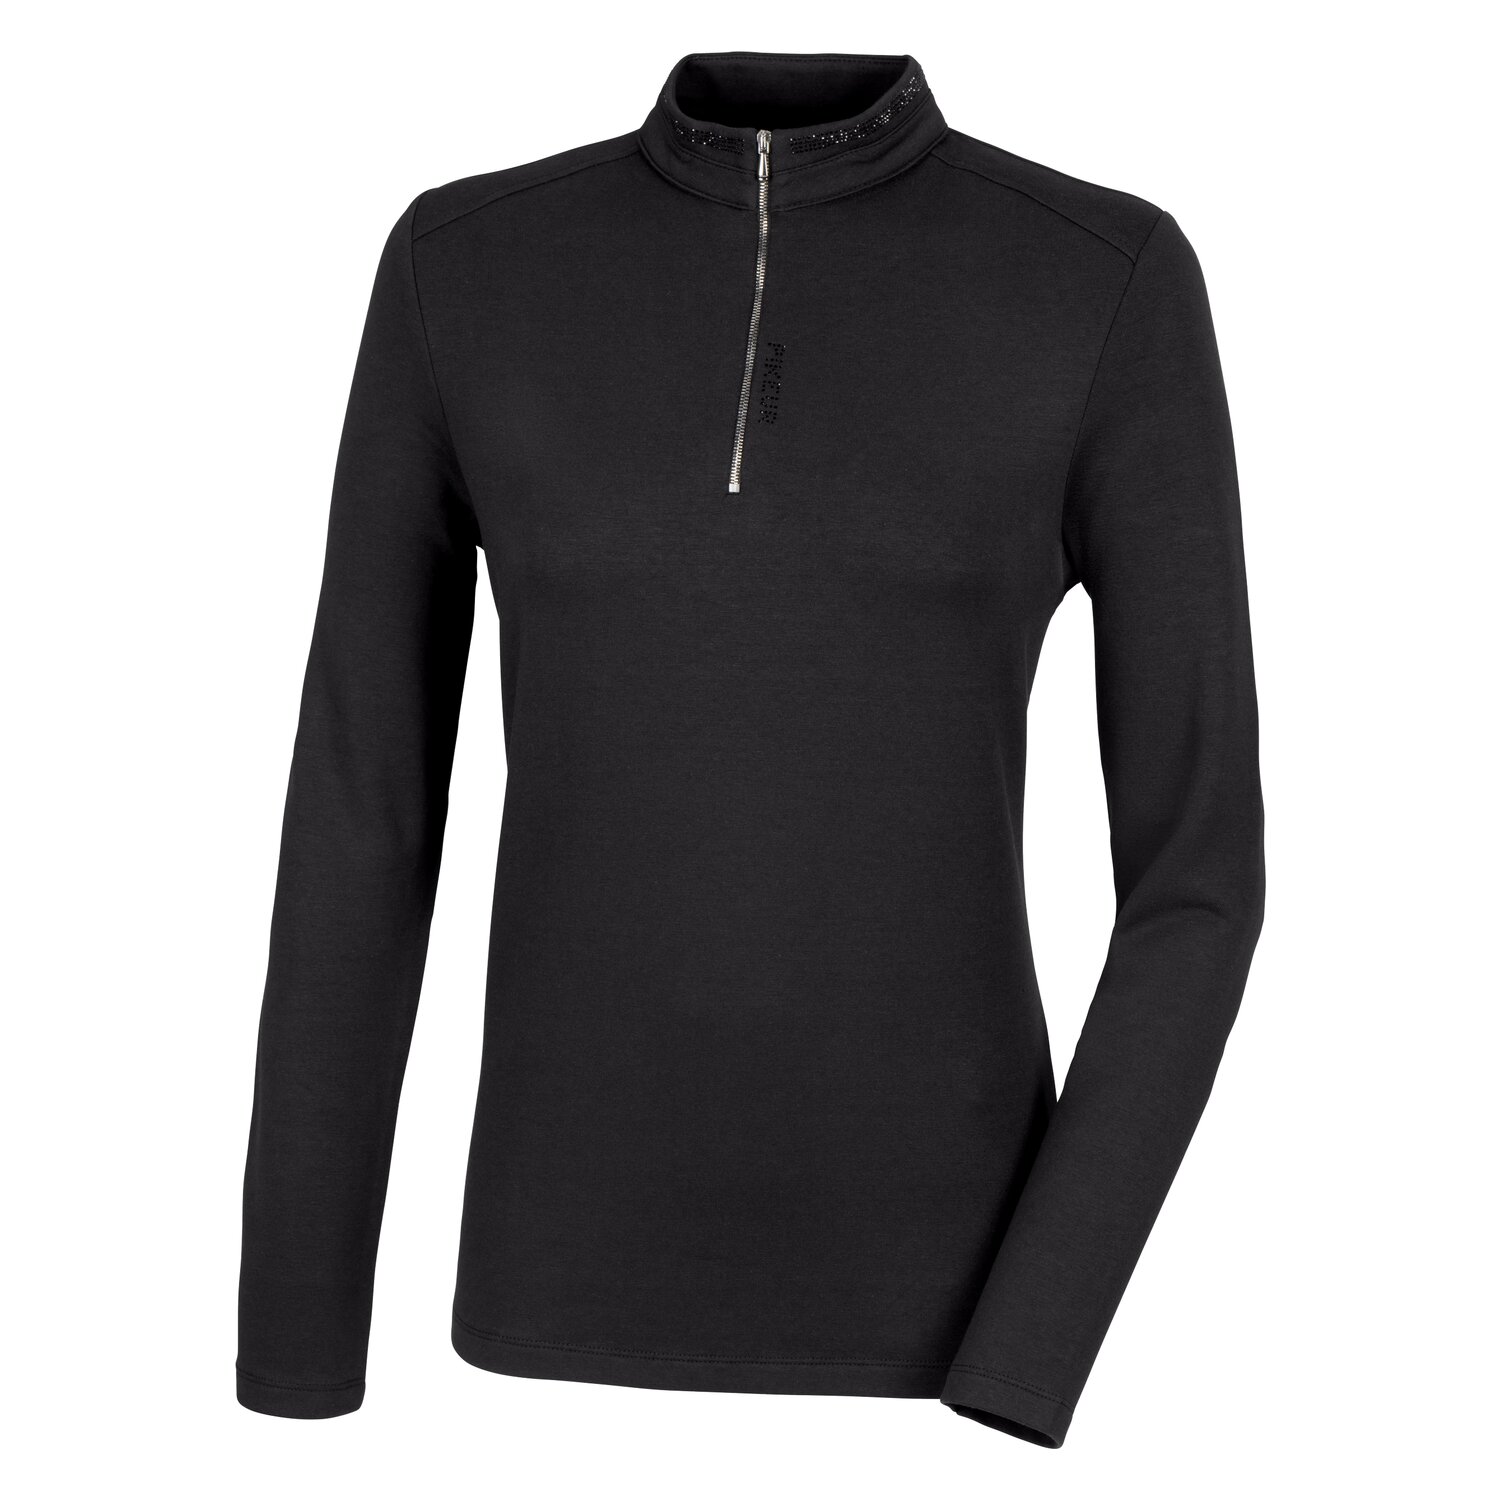 PIKEUR SPORTS Collection Funktions-Zip-Shirt 